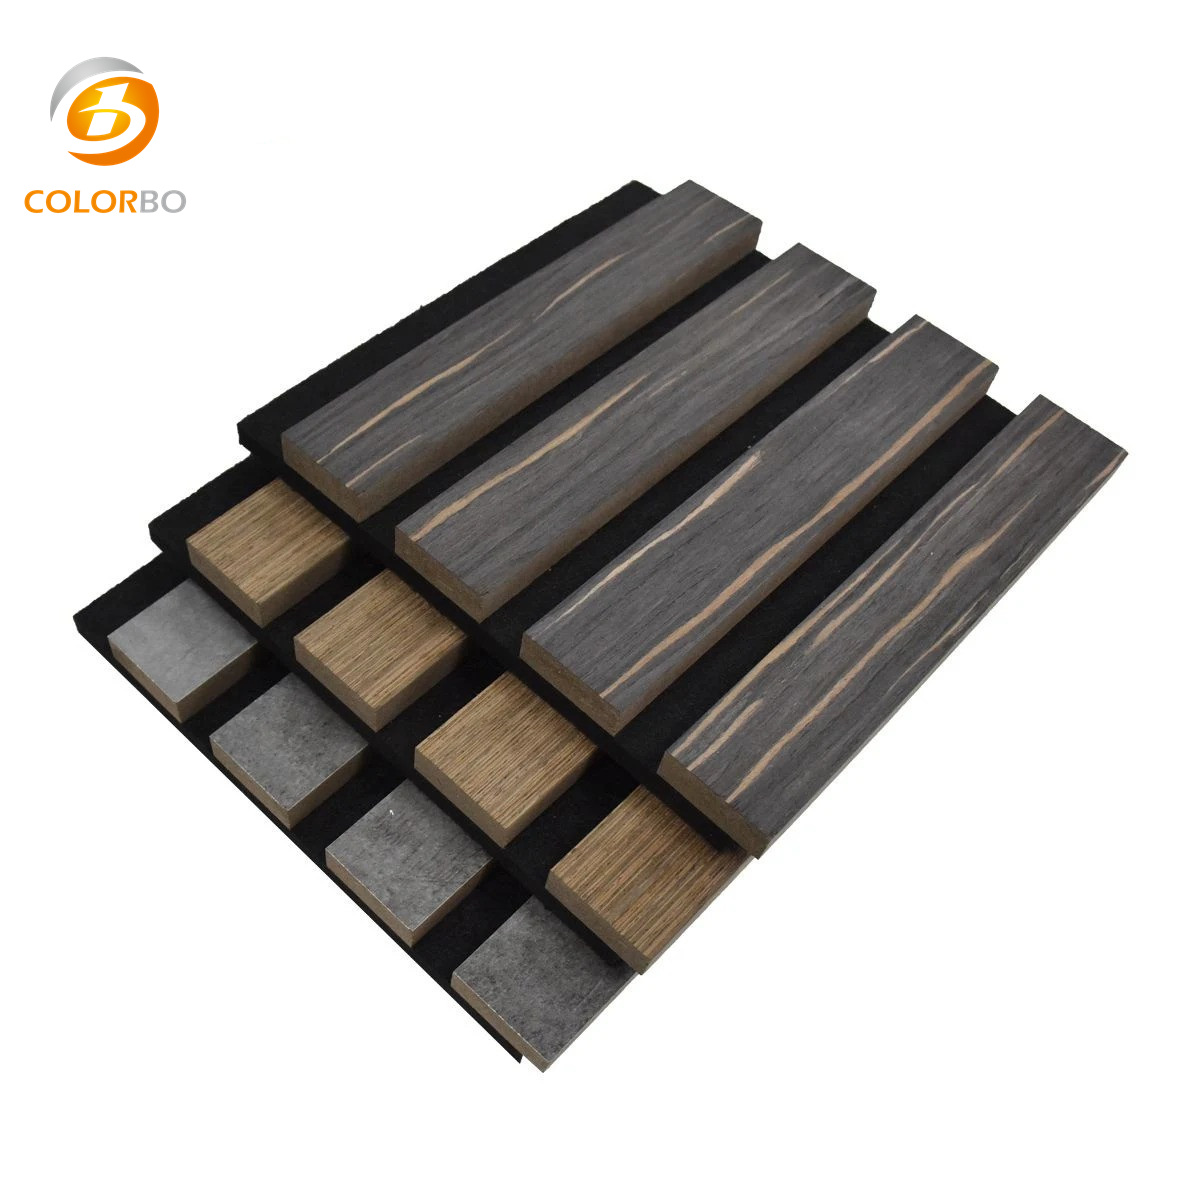  3D Soundproofing Wooden Slats Wall Covering Wood PET Acoustic Panel